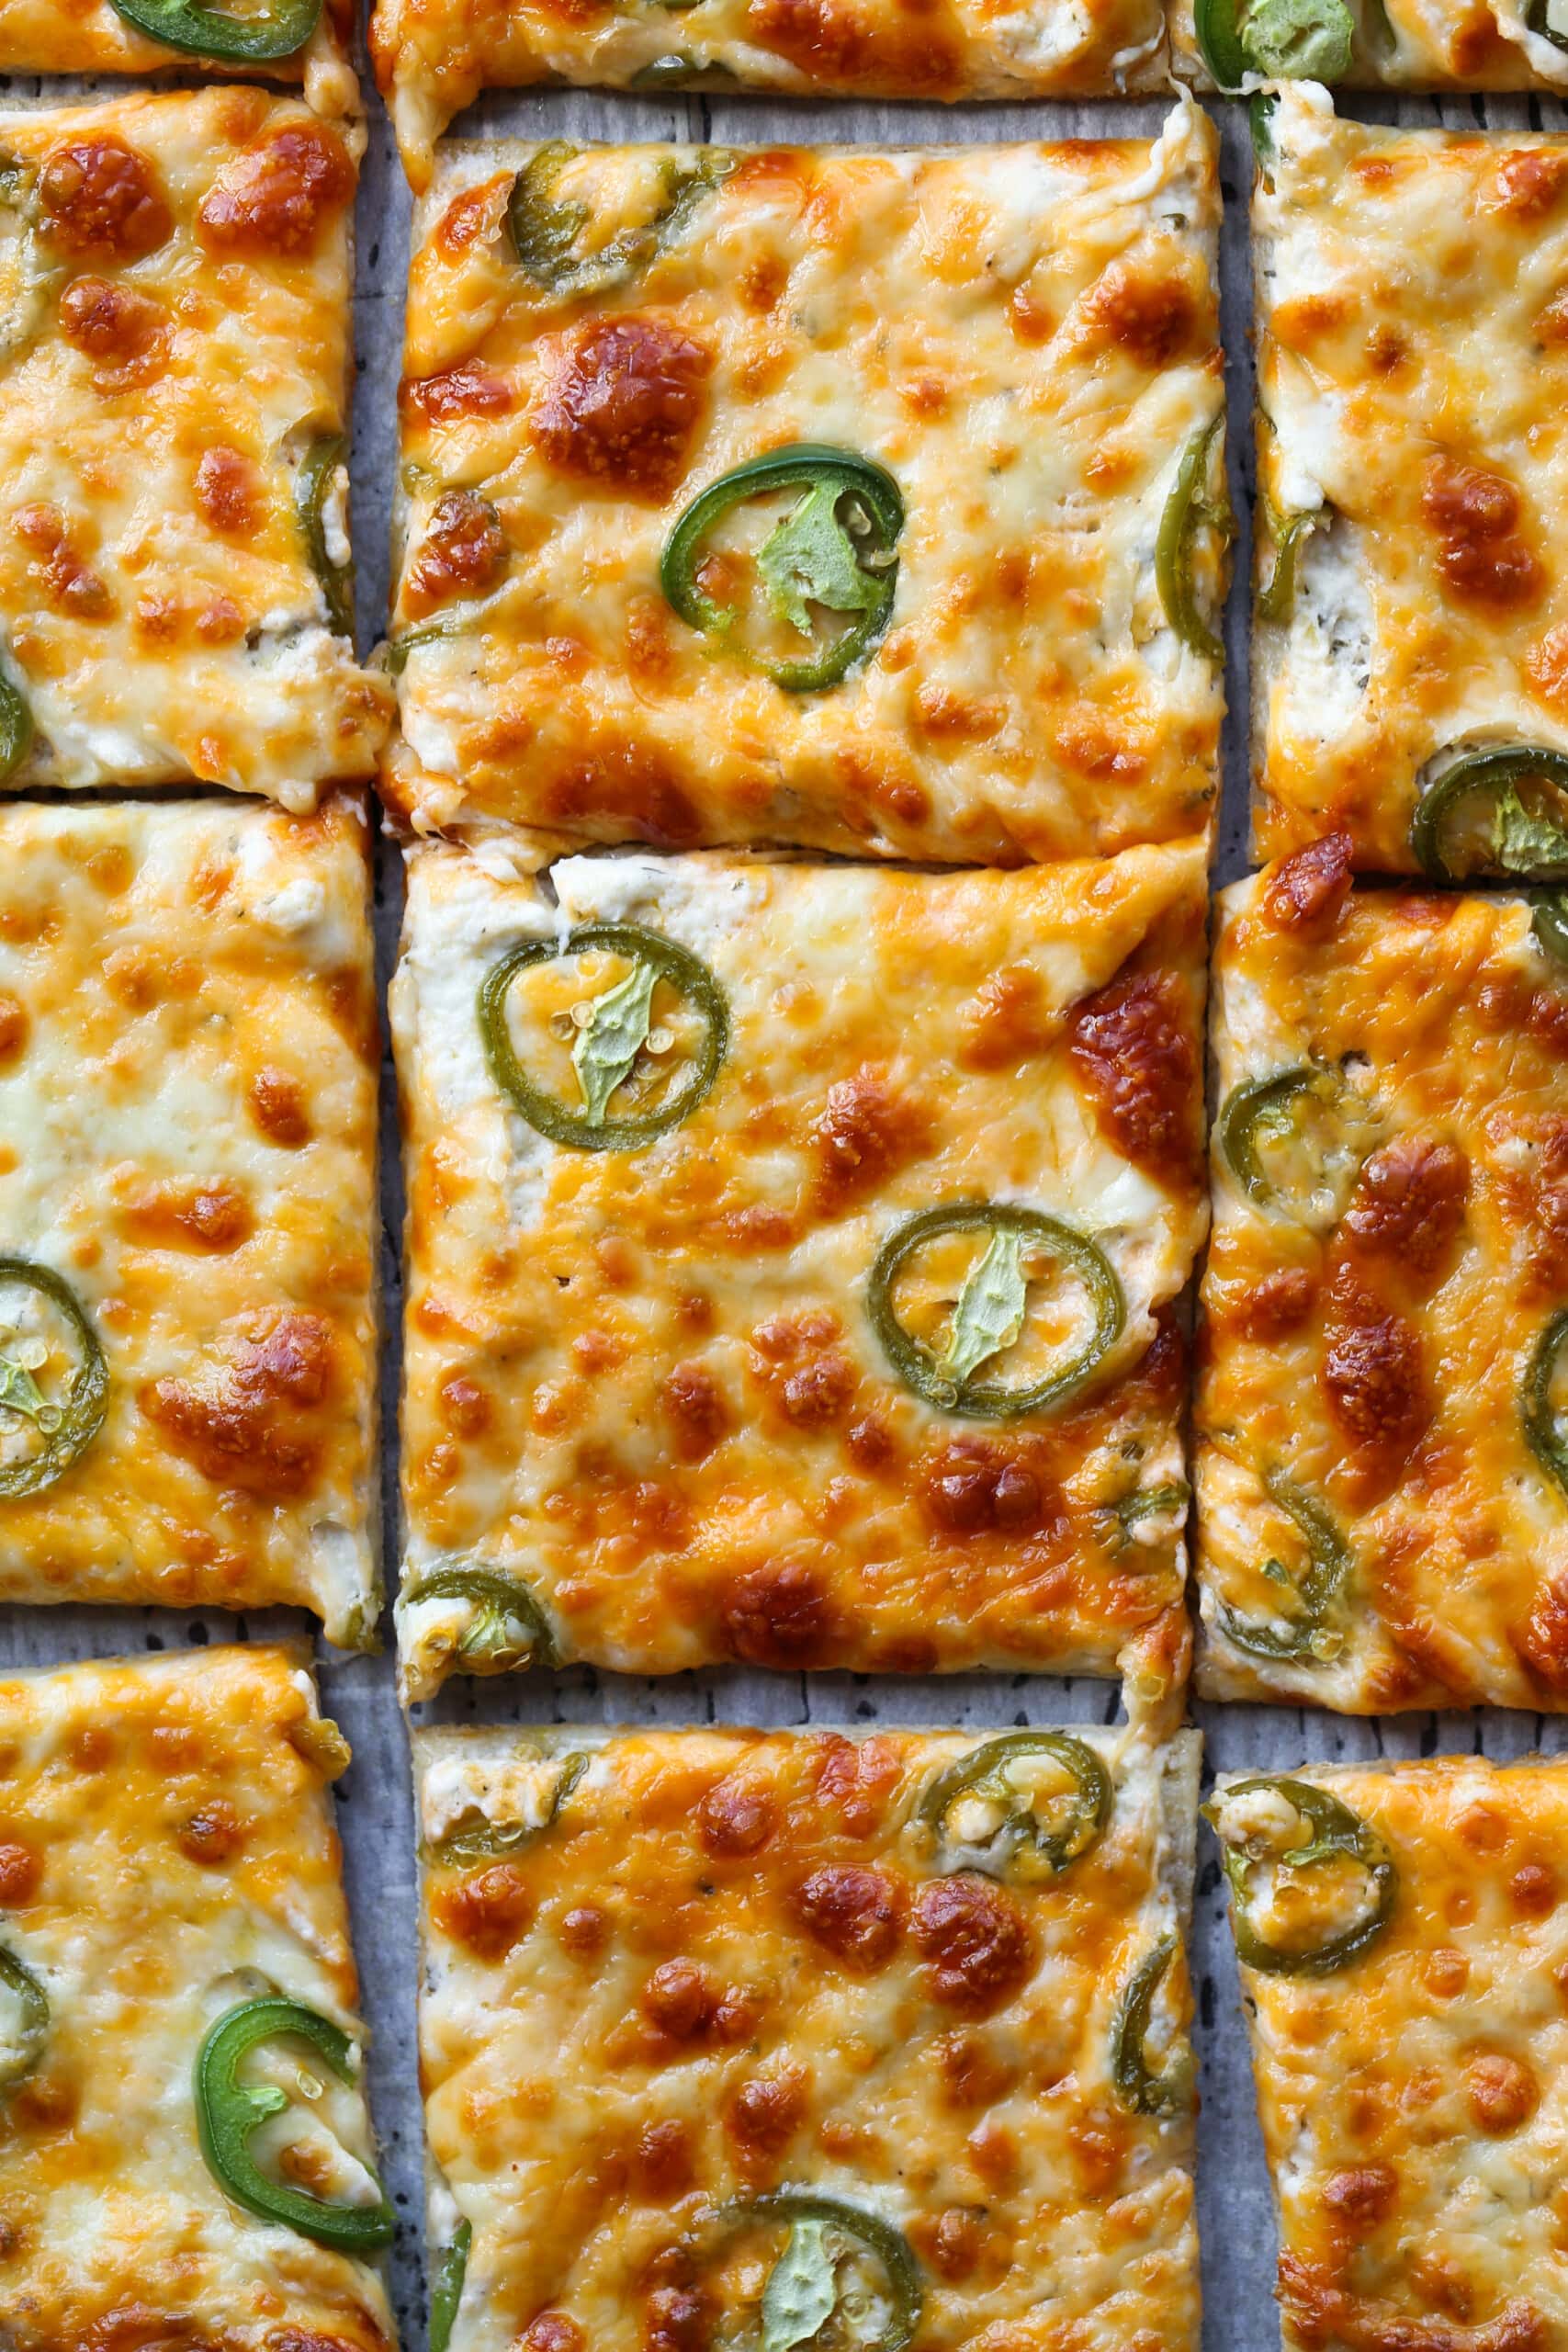 Jalapeno Popper Pizza - The Ultimate Party Food | Cookies and Cups